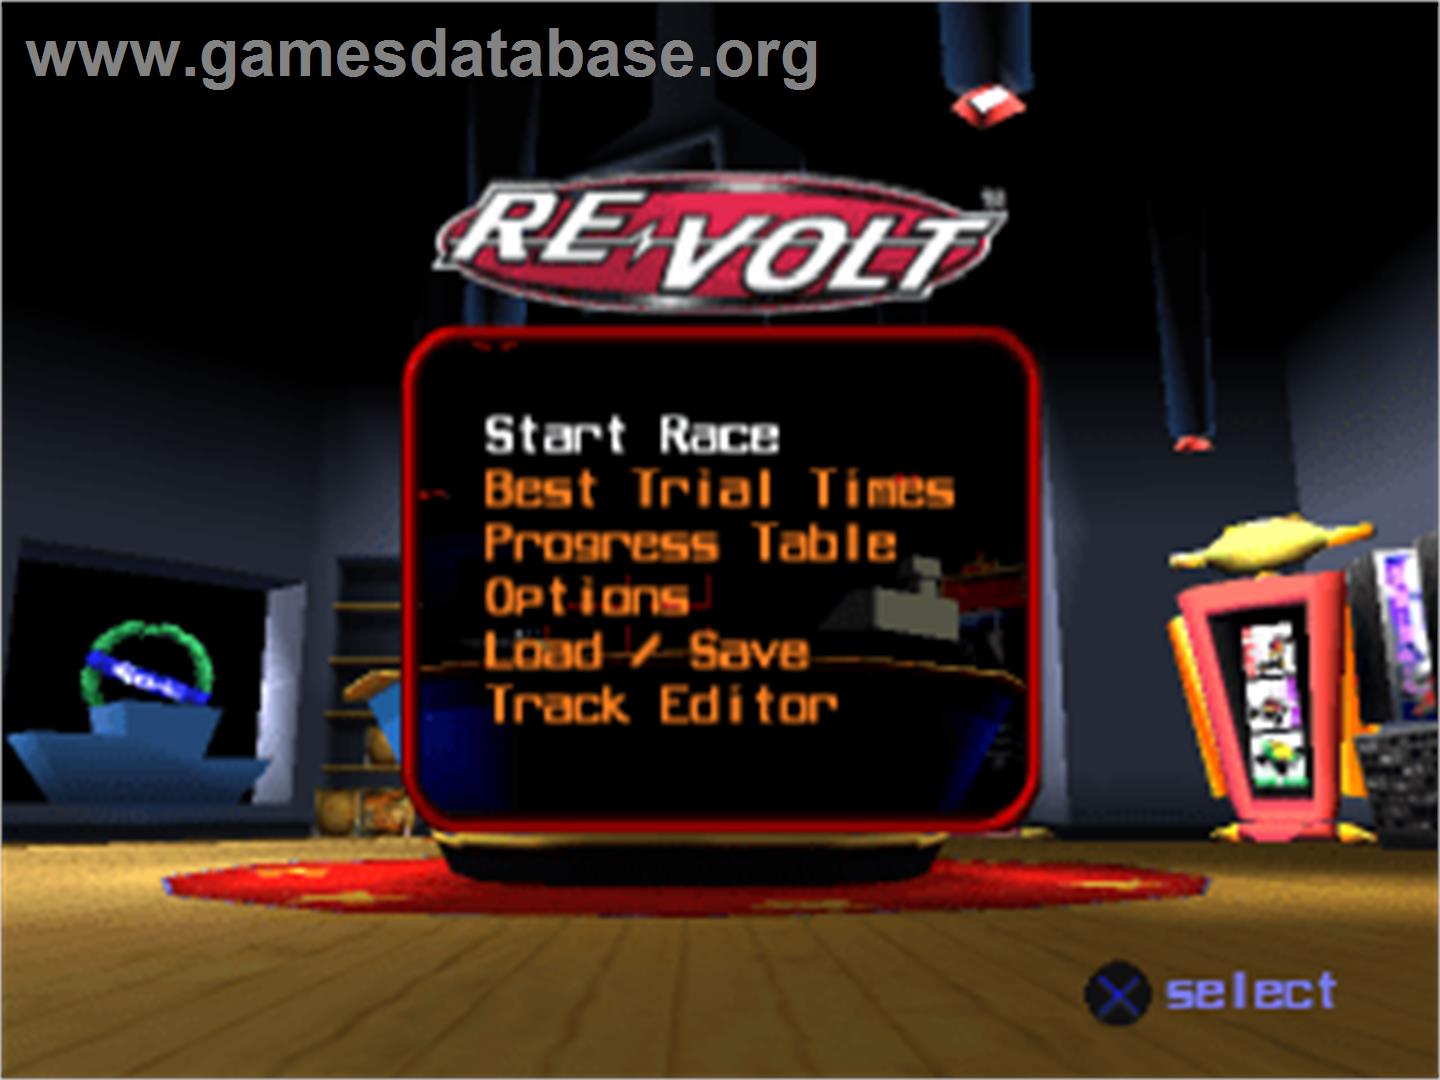 Re-Volt - Sony Playstation - Artwork - Title Screen